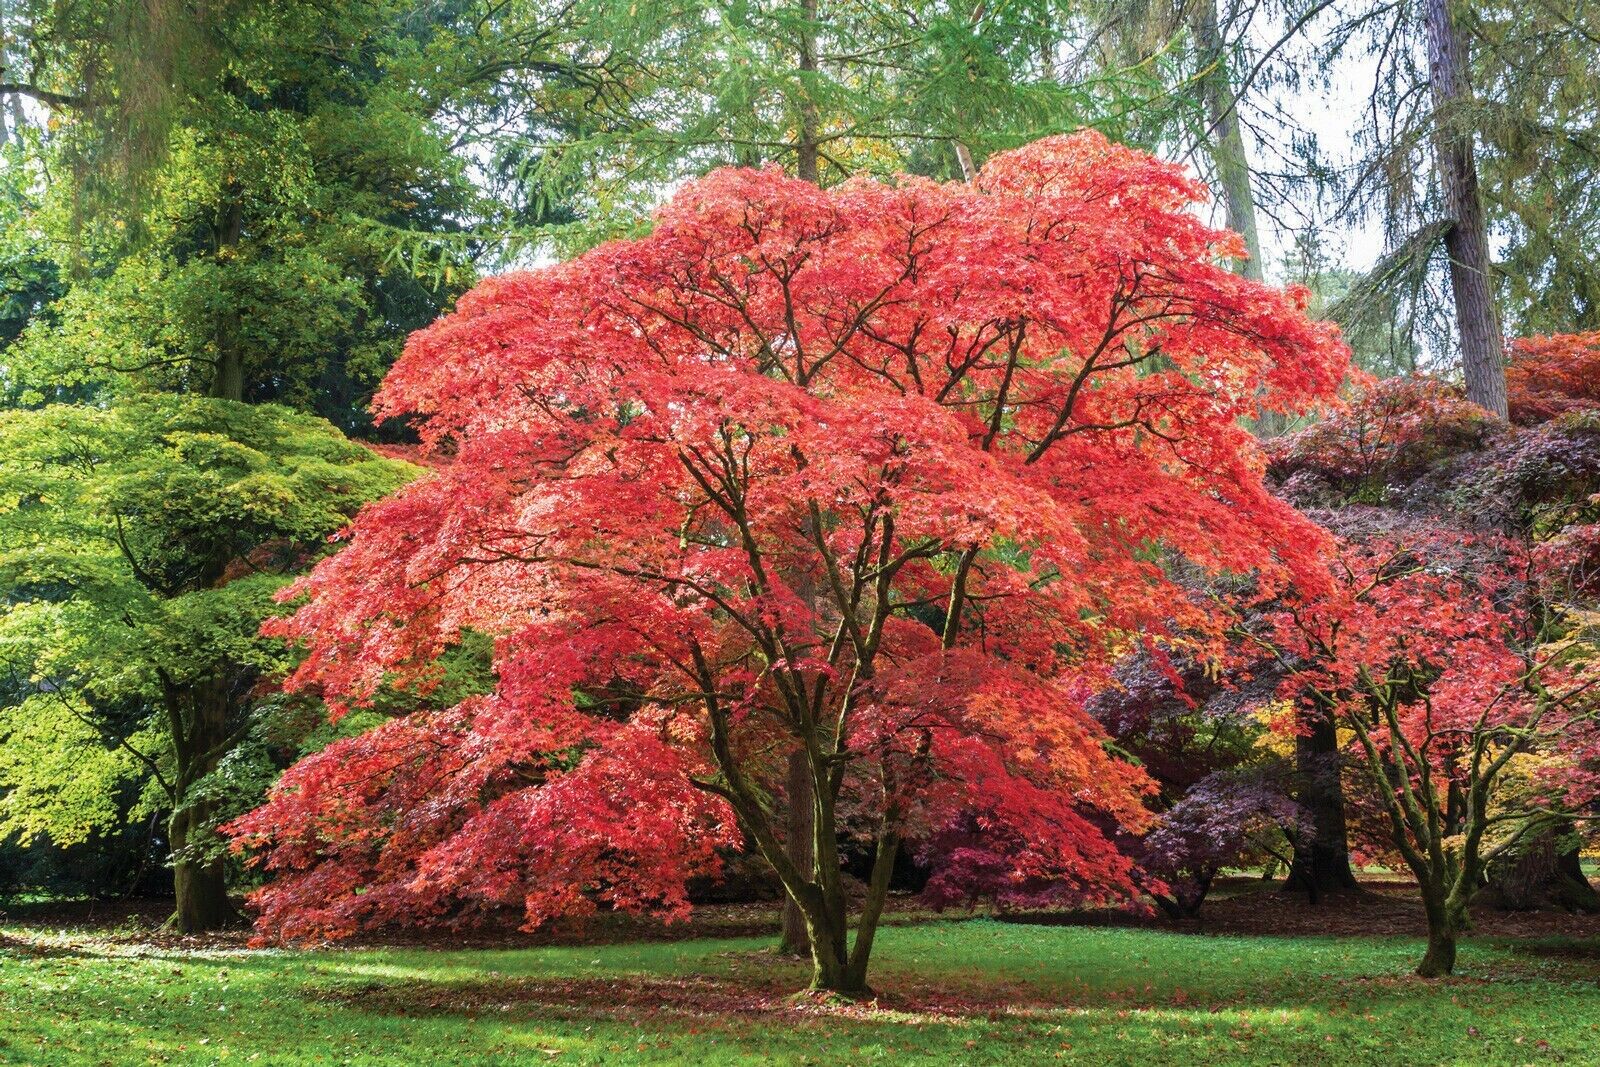 A vibrant red maple tree, one of the top indoor plants in full autumn color, surrounded by green trees in a peaceful forest setting. Acer palmatum ‘Japanese Maple’